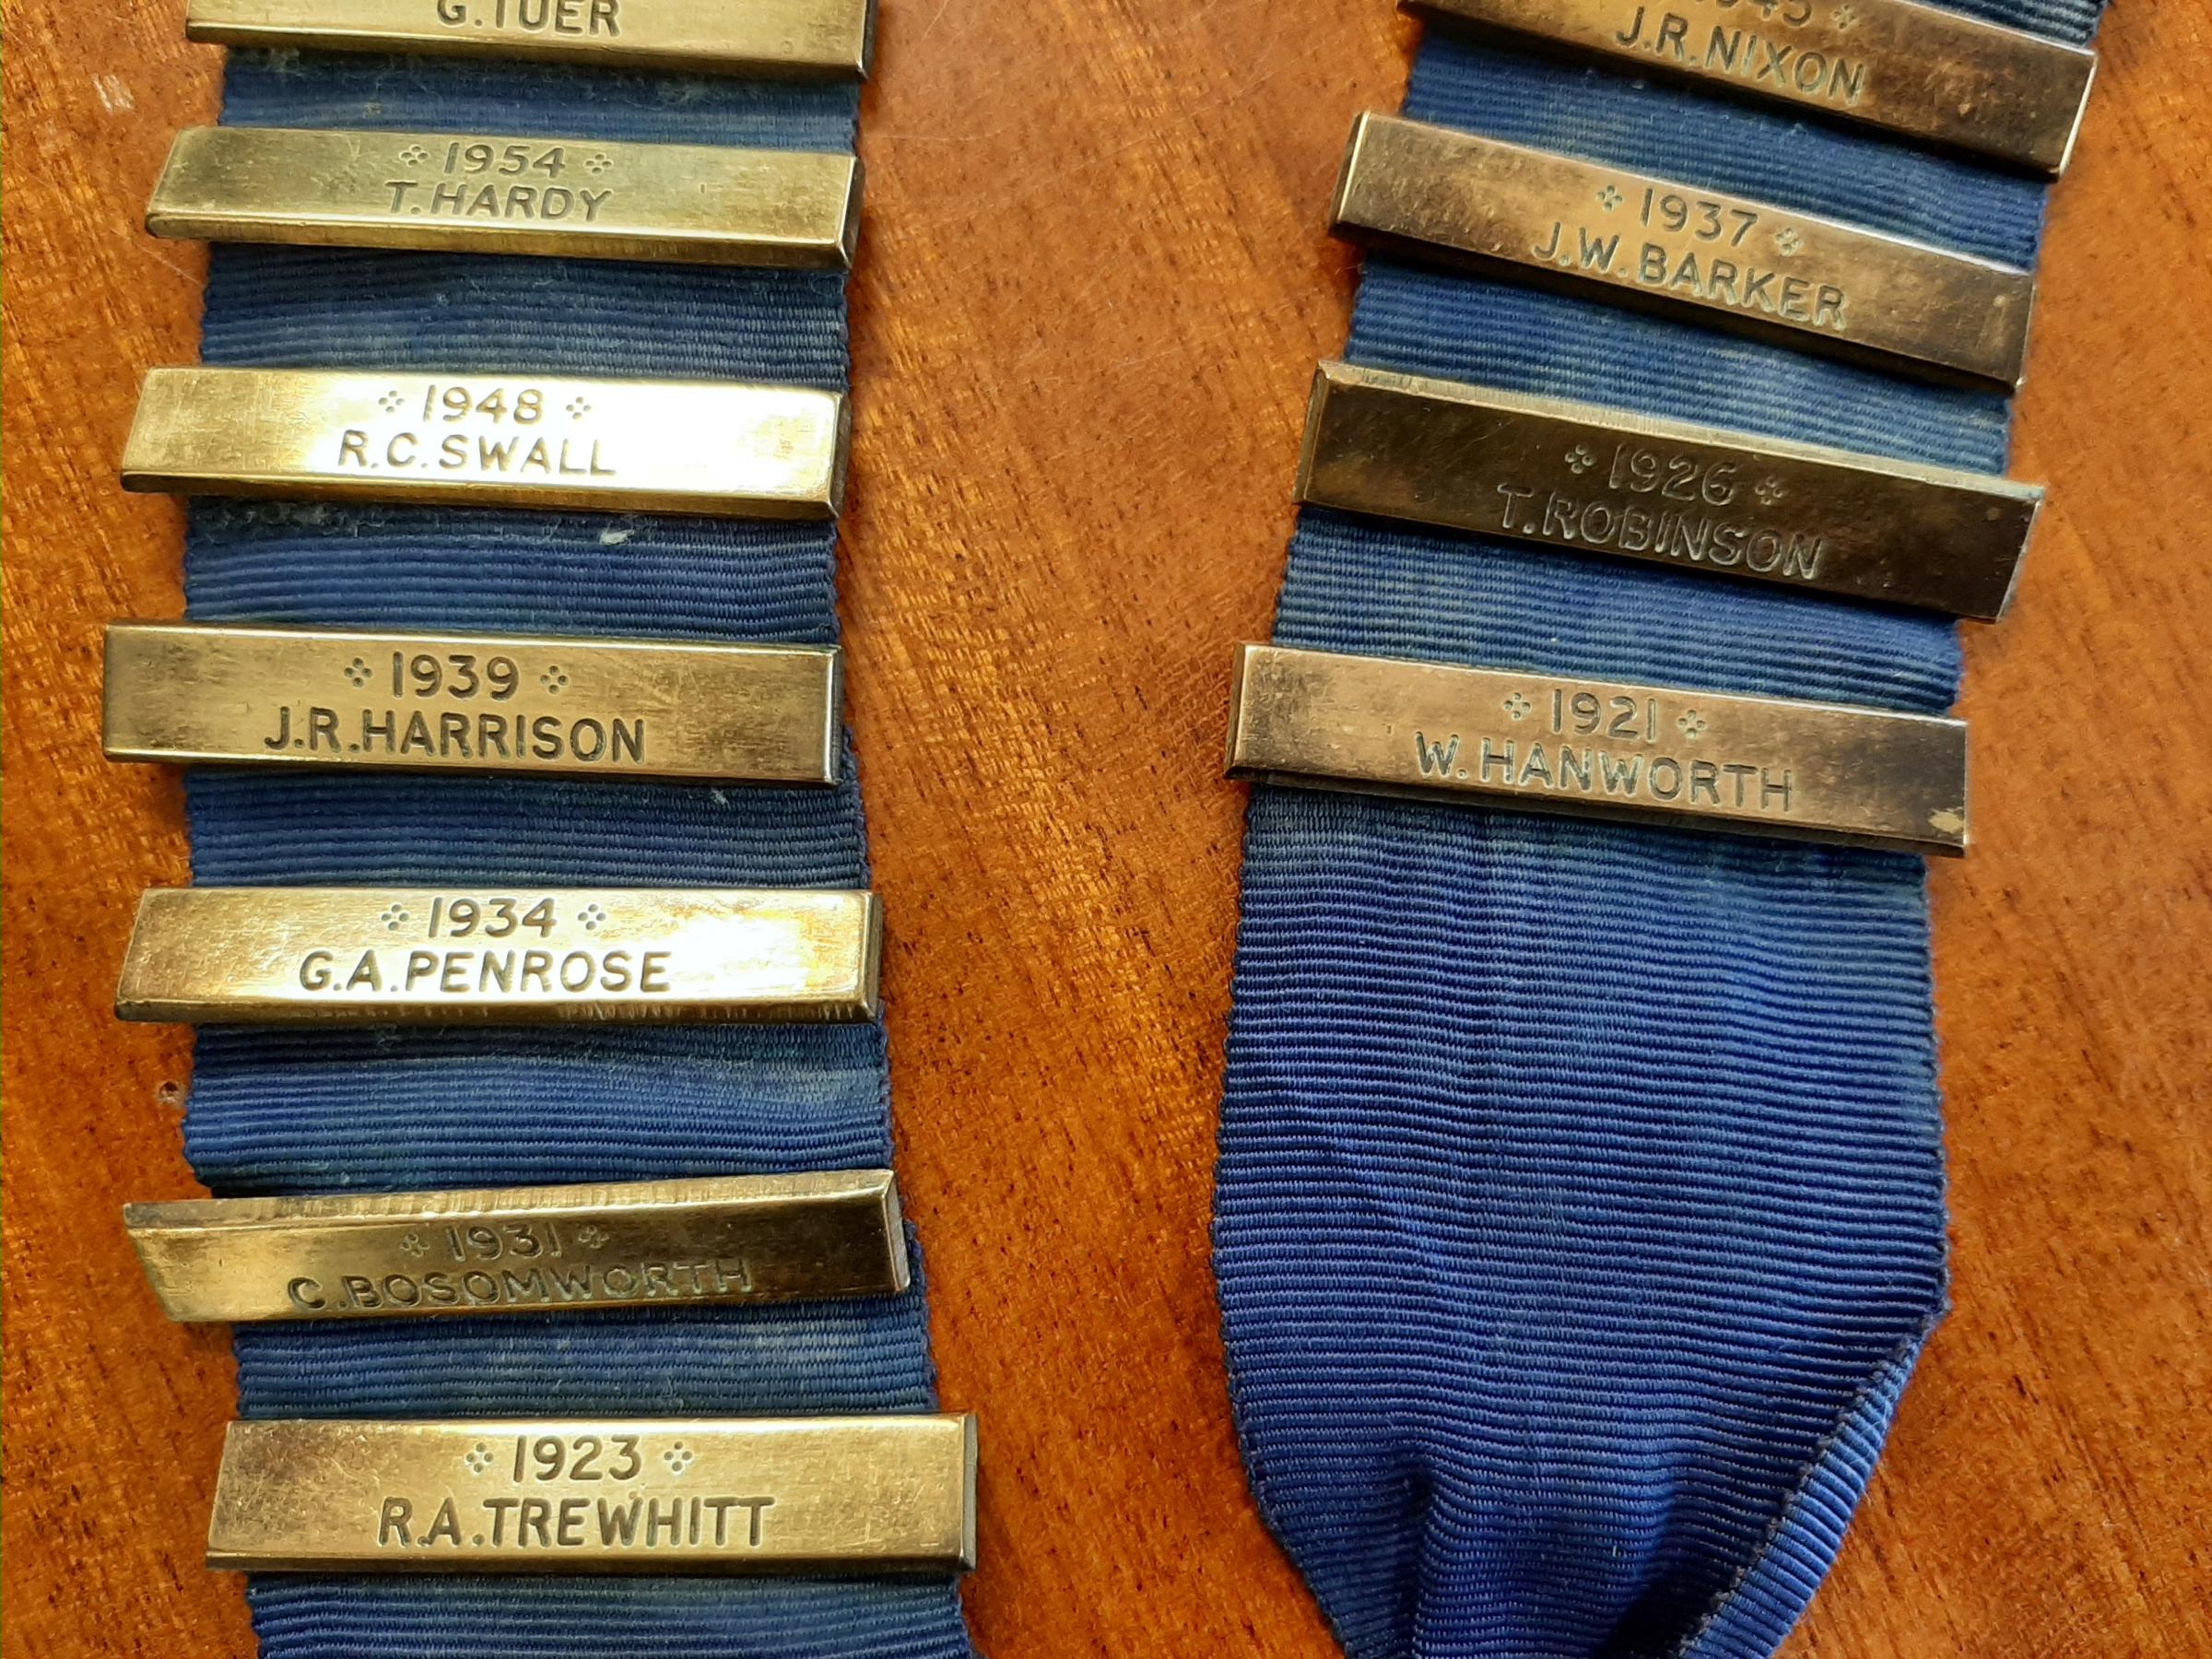 The chains of office for Brompton and District Agricultural Discussion Society, showing the names of some of the earliest chairman